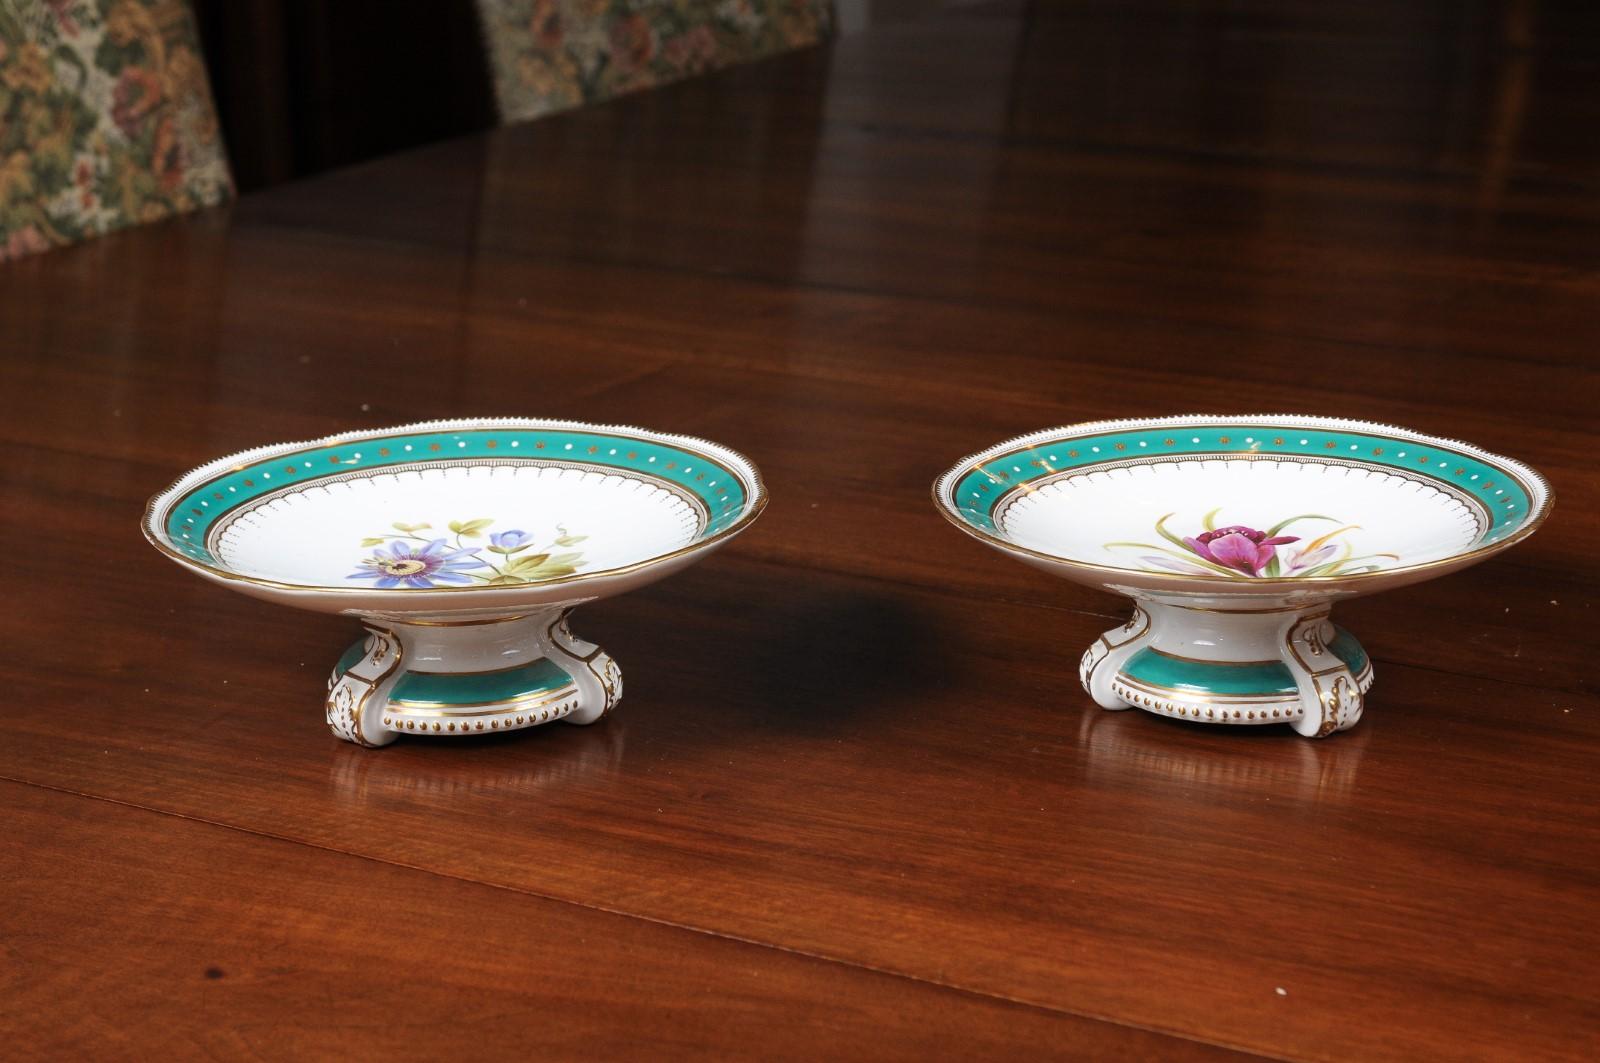 English porcelain compotes from the 19th century, with floral motifs and green borders. We currently have two available, priced and sold individually. Born in England during the 19th century each of these two compotes attracts our attention with its